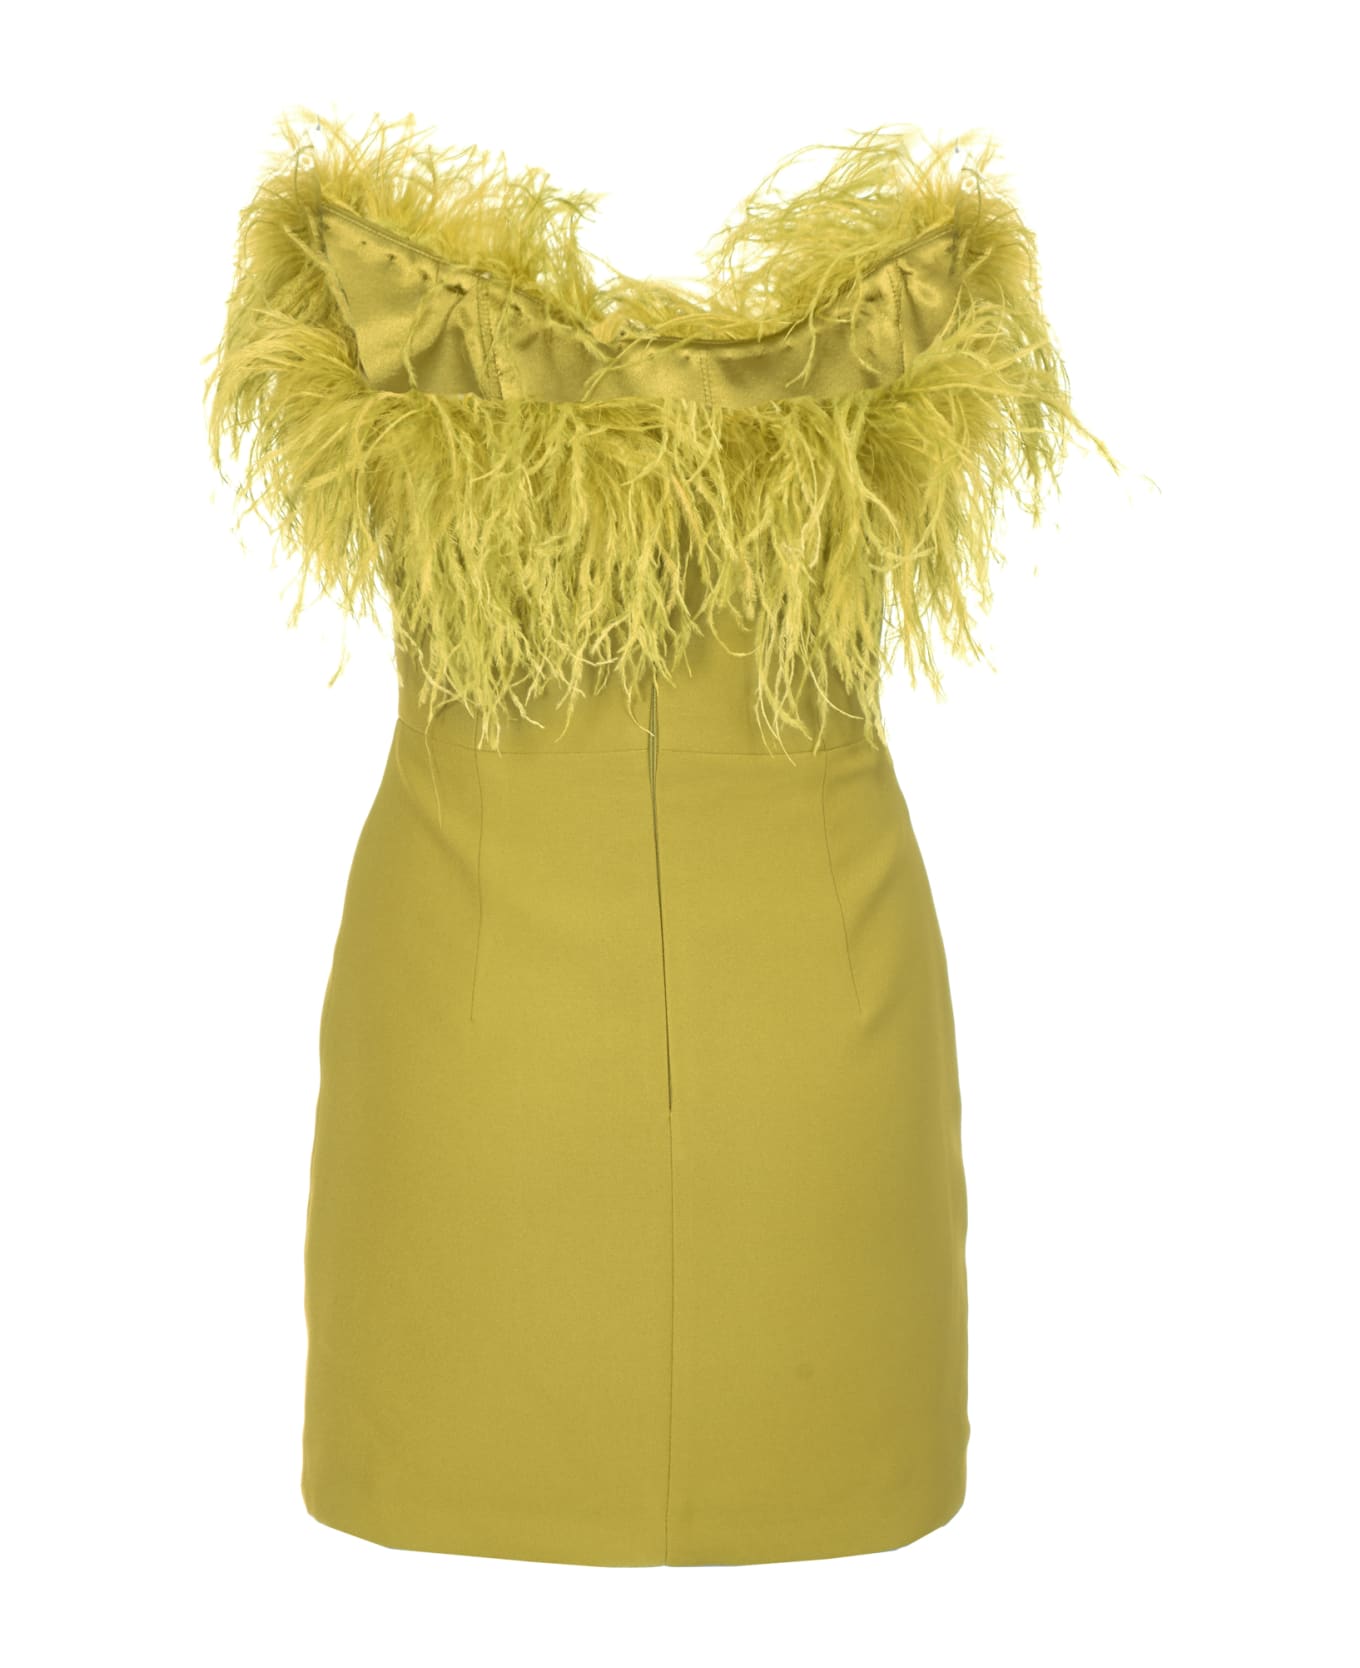 NEW ARRIVALS Short Dress With Feathers - Yellow